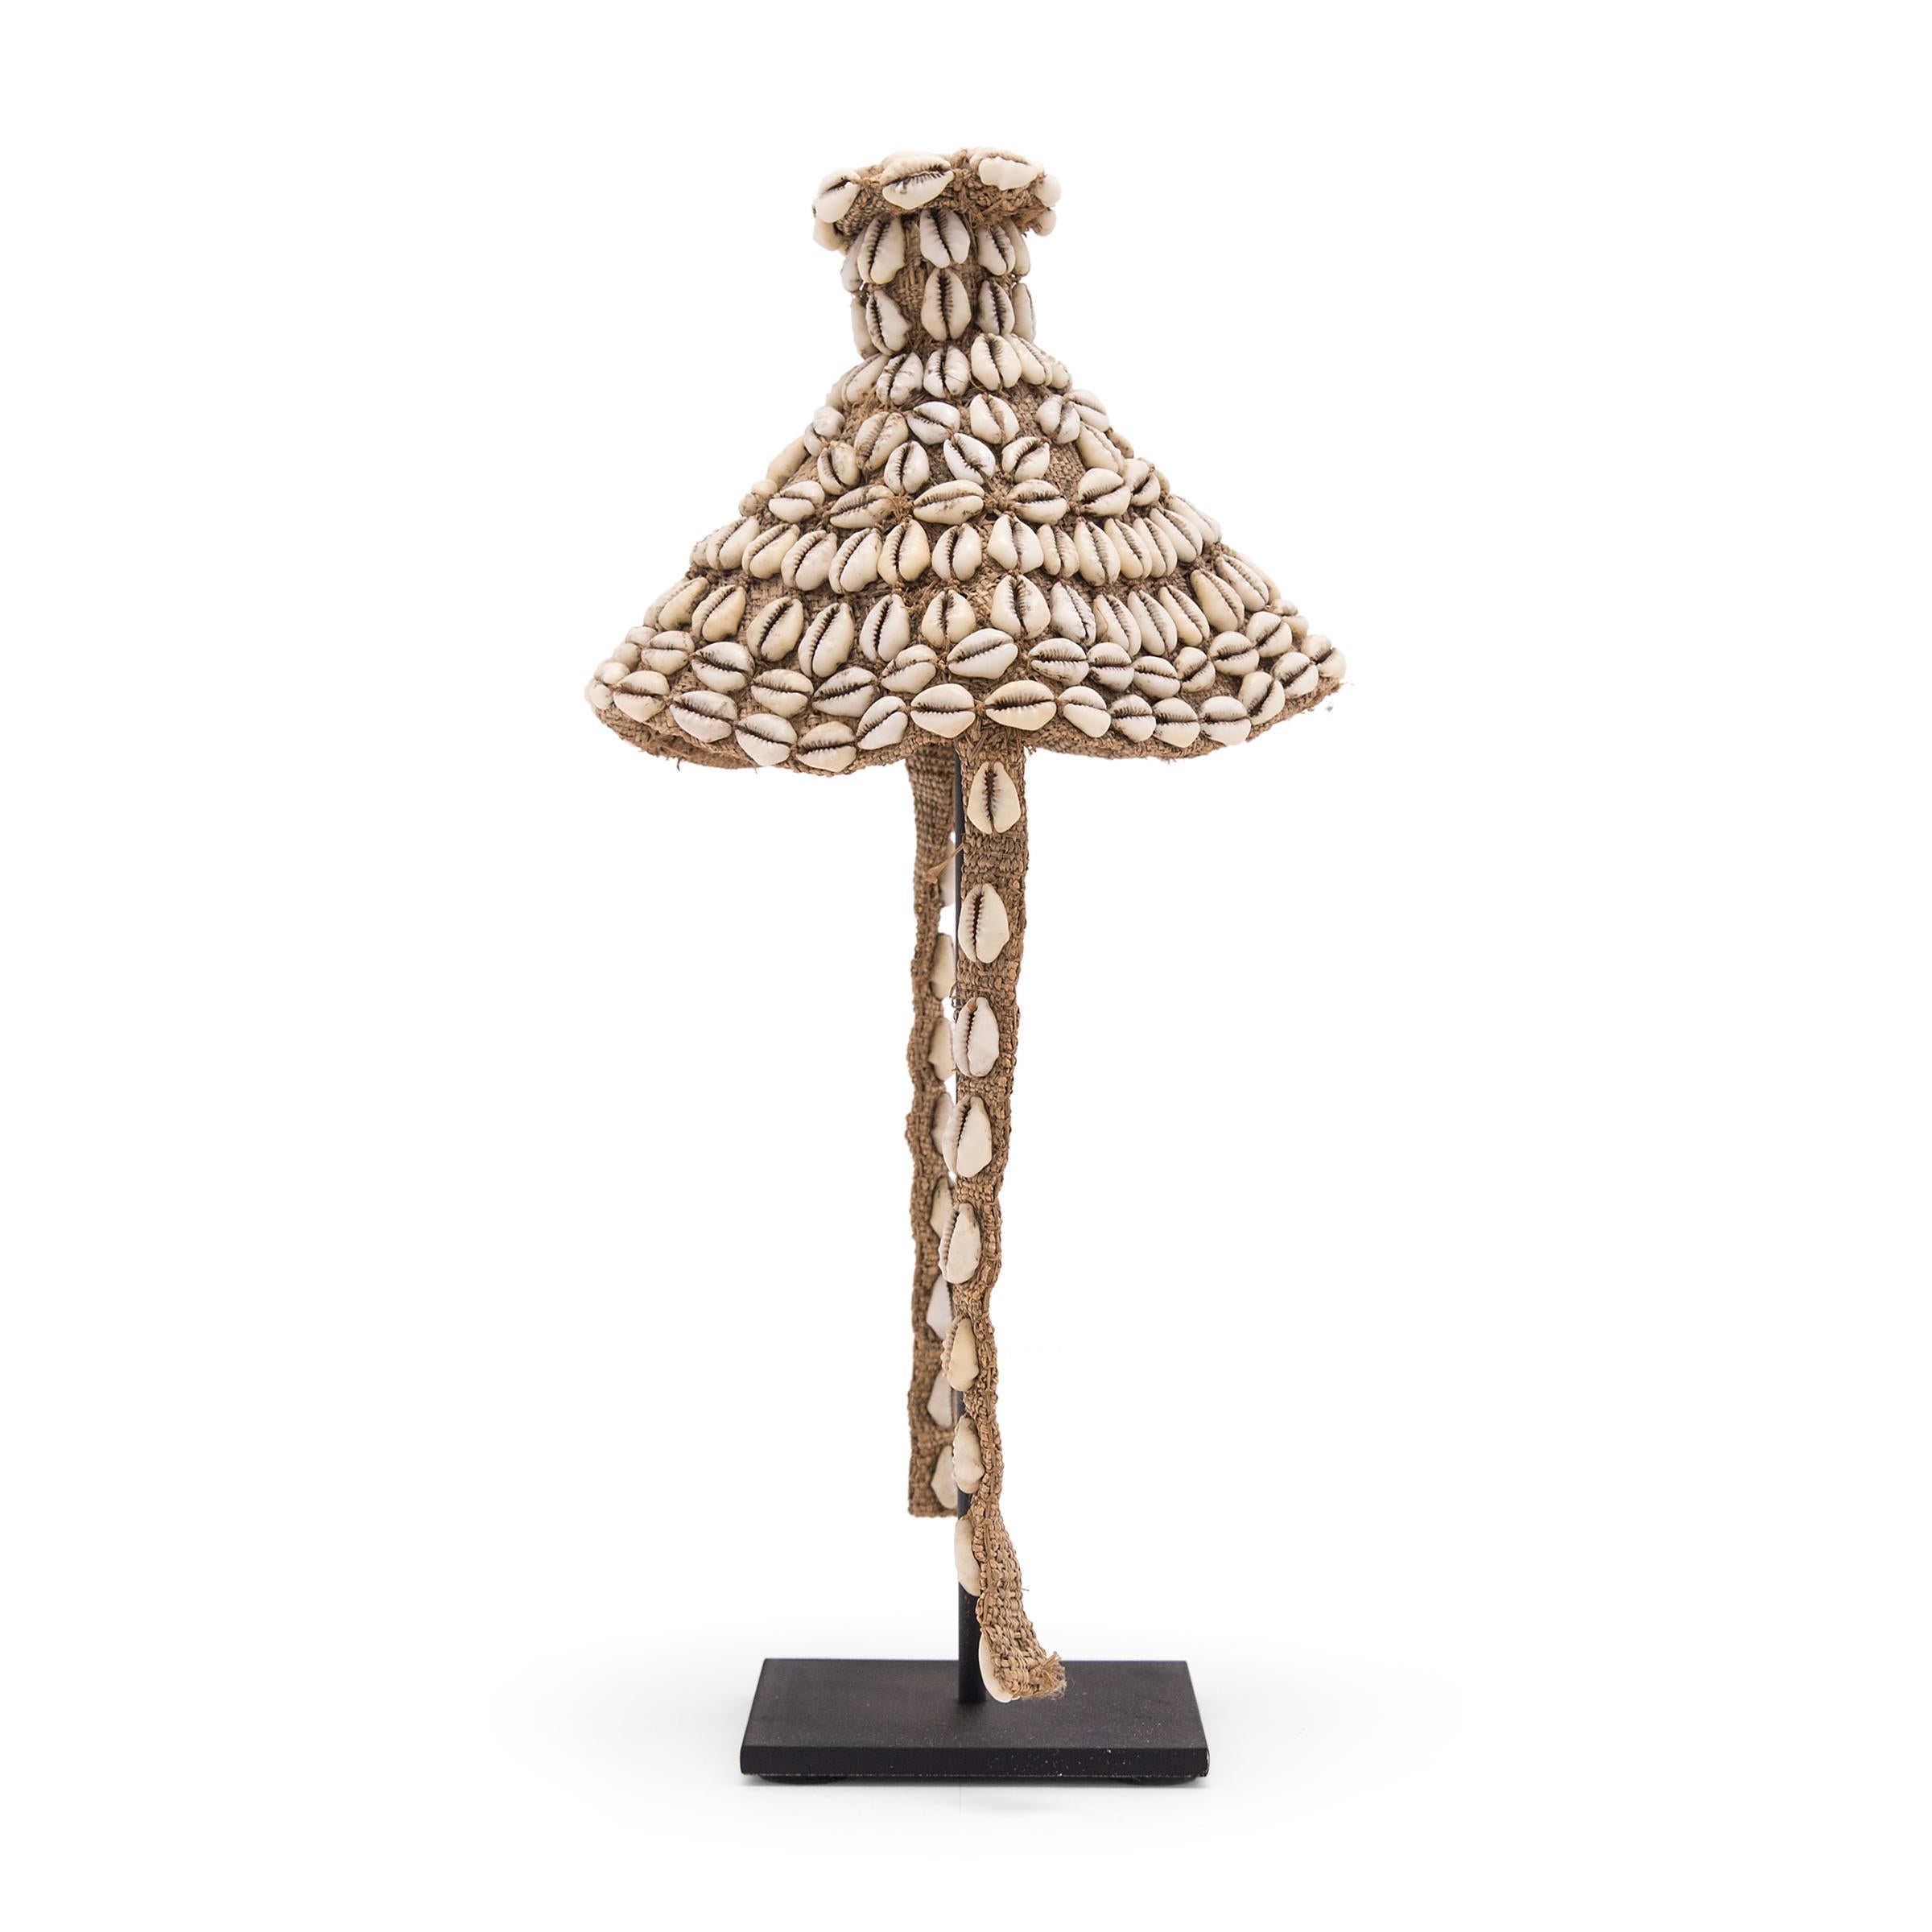 This petite cone-shaped cap, known as laket, was created by an artisan of the Kuba peoples of the Democratic Republic of the Congo. The base is made of a simple woven raffia fabric, which was then embellished with a pattern of cowrie shells. Secured